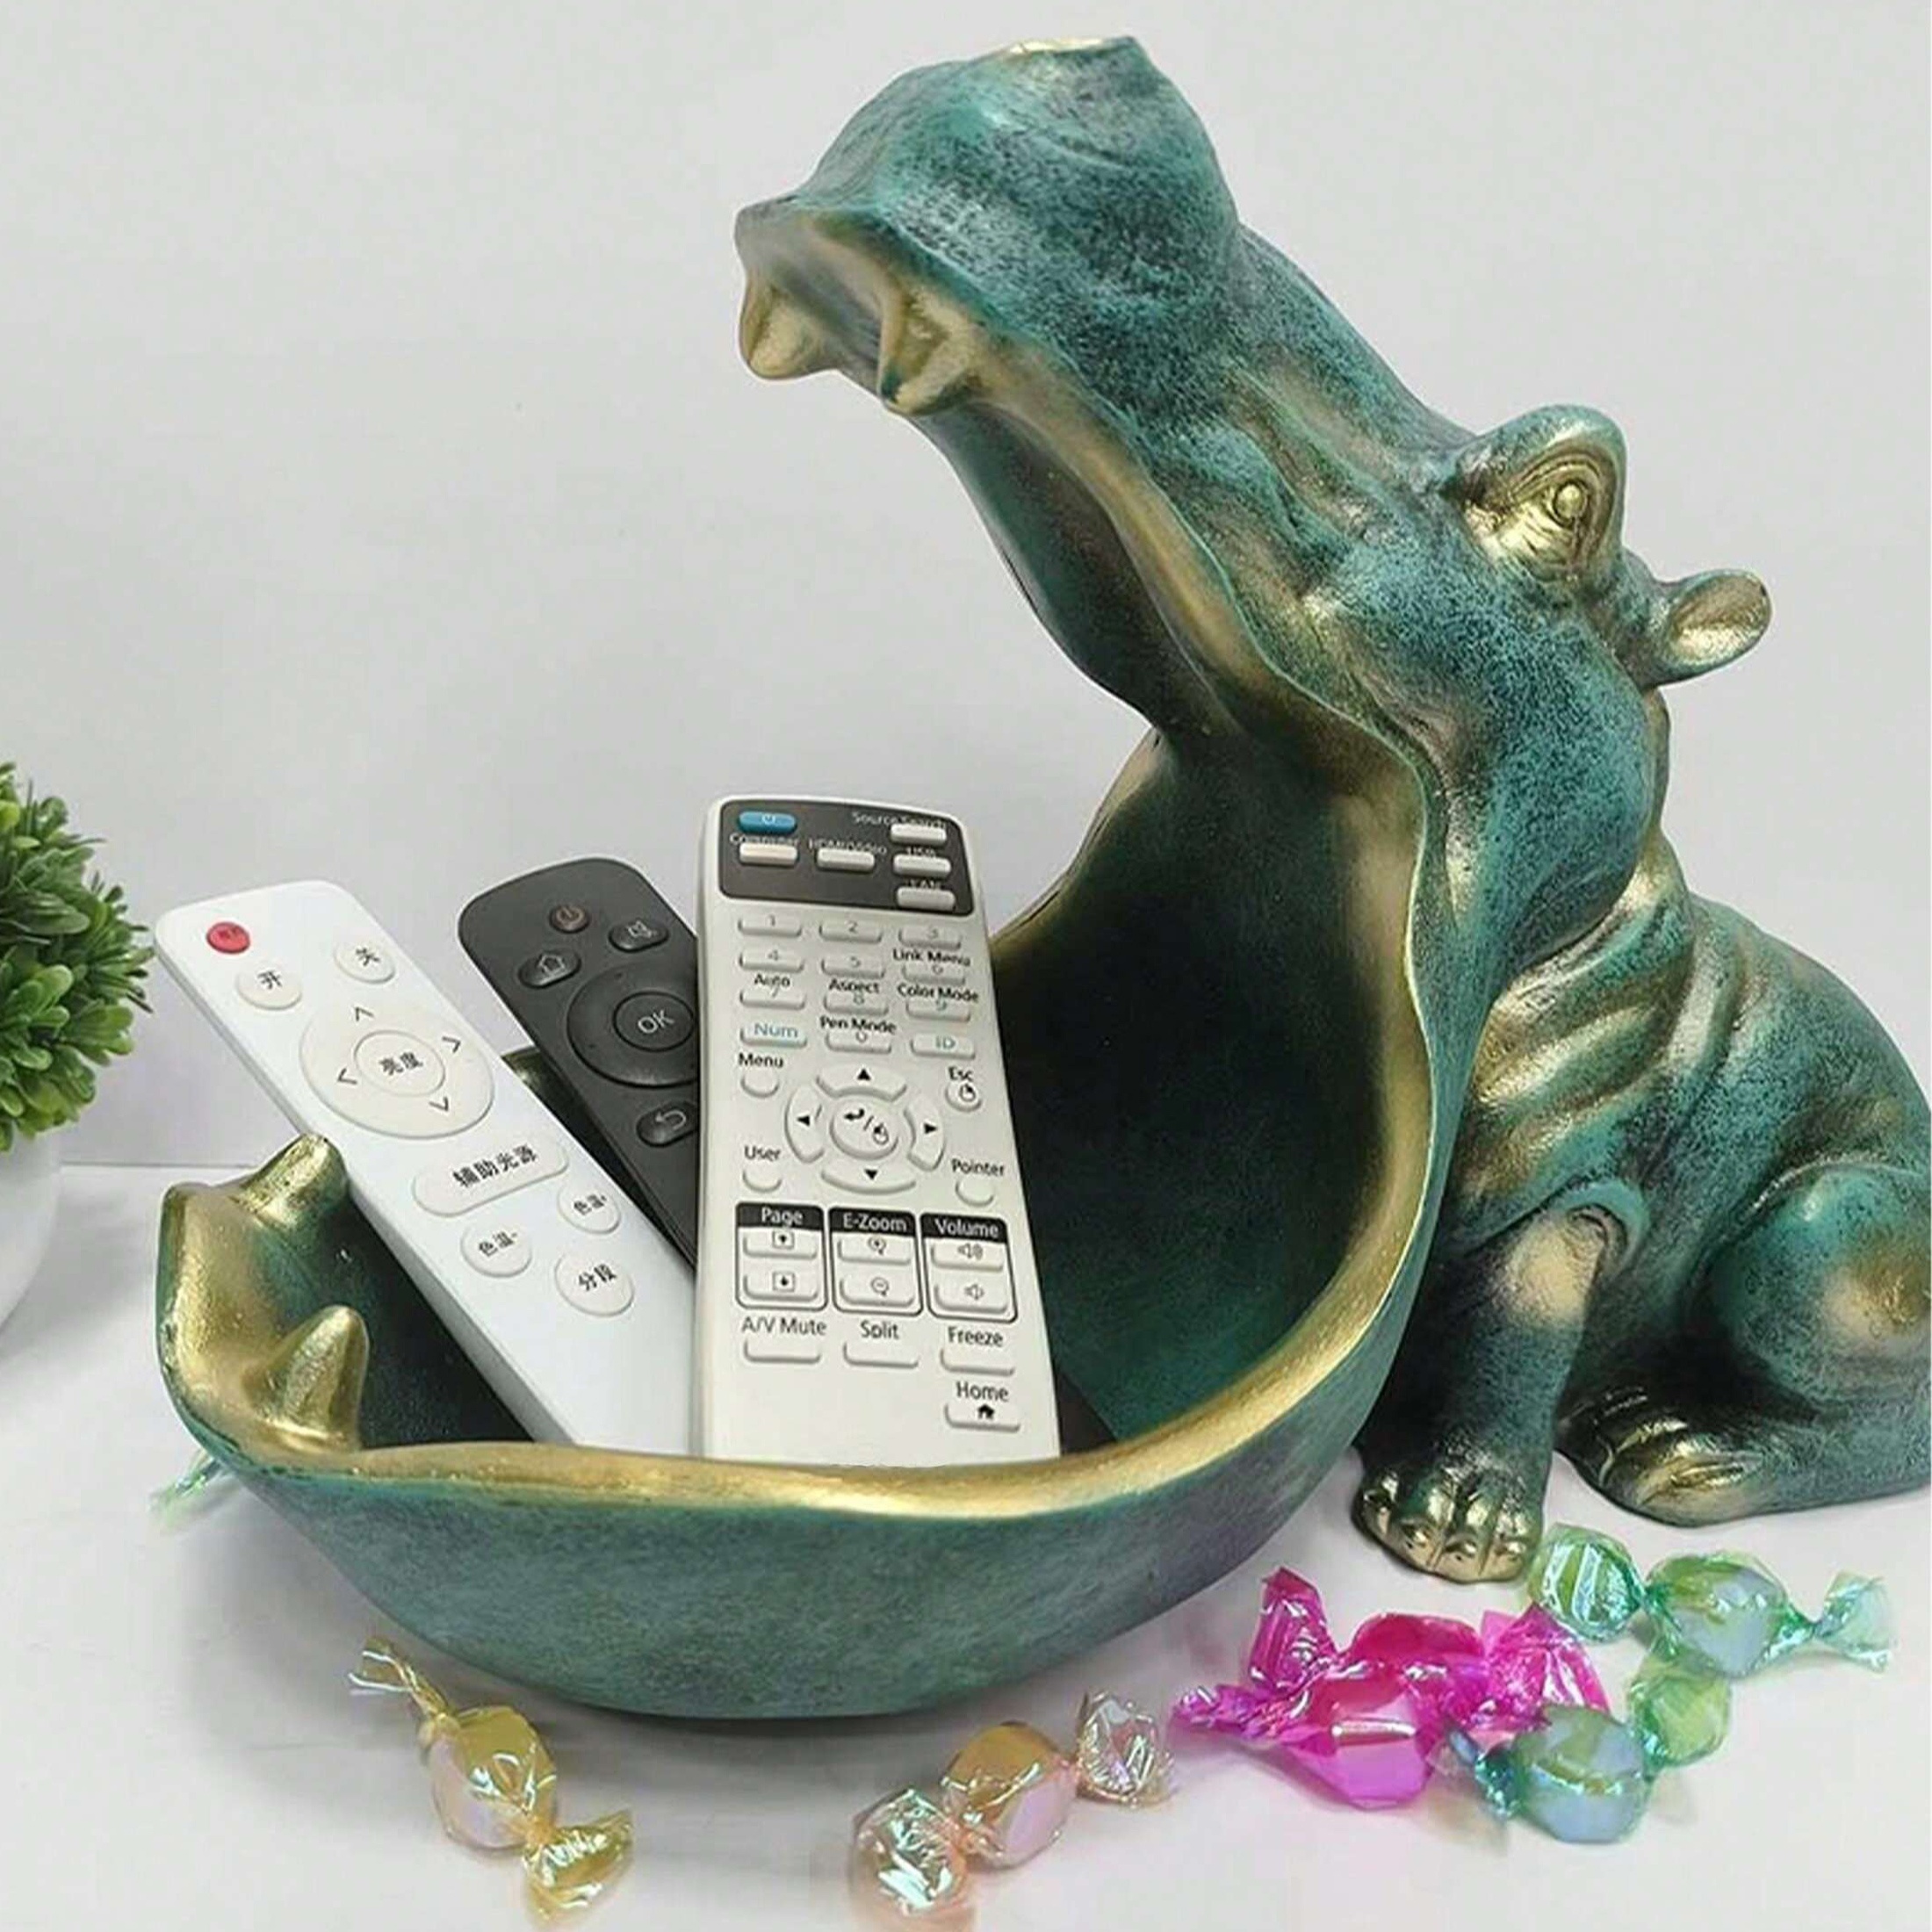 

Charming Hippo Resin Figurine - Versatile Candy Dish & Key Bowl, Perfect For Home Decor